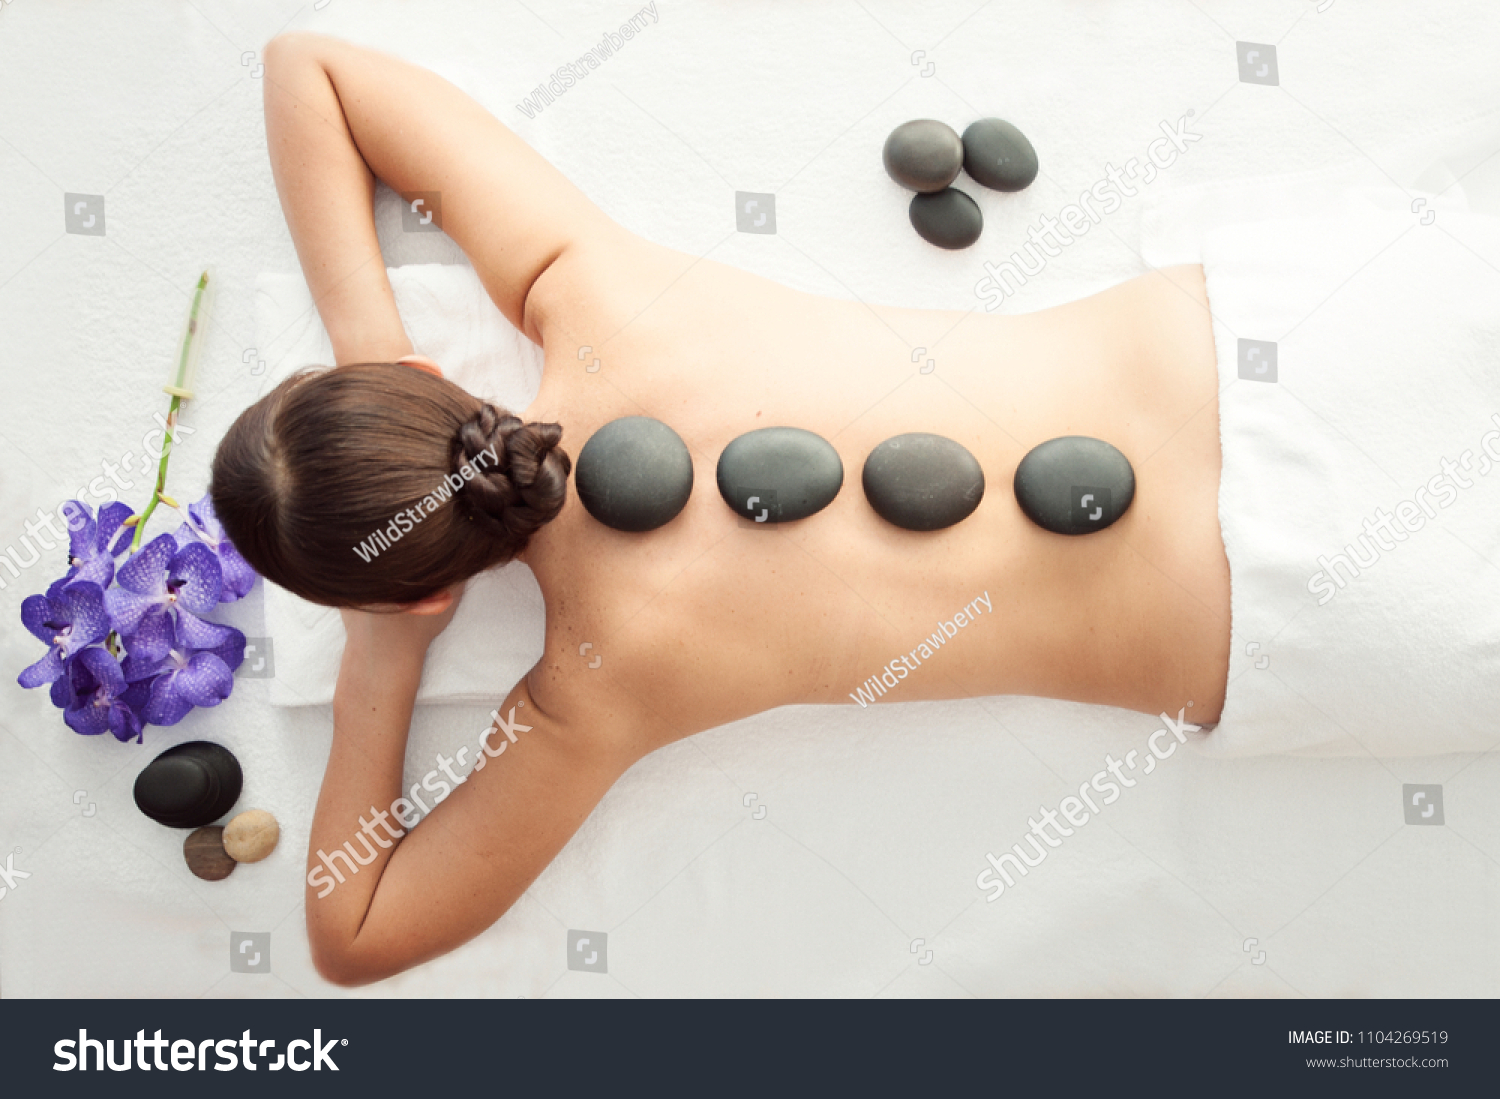 Stone treatment. Top view of beautiful young woman lying on front with spa stones on her back.  Beauty treatment concept. #1104269519